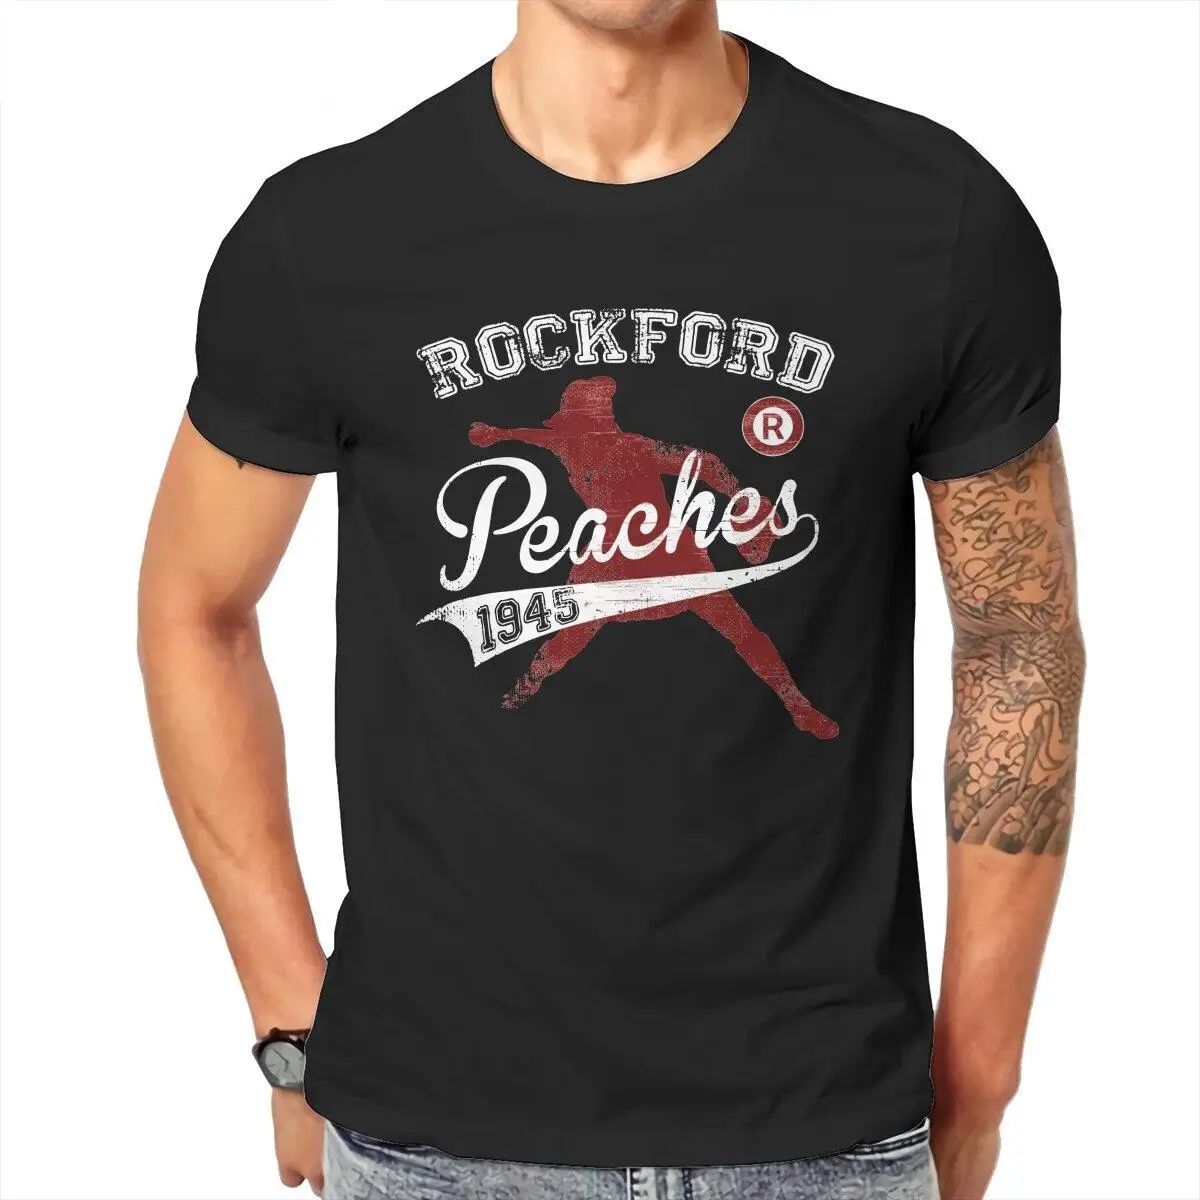 

Men T-Shirt Rockford Peaches A League Of Their Own Novelty Pure Cotton Tee Shirt Short Sleeve T Shirts Tops Graphic Printed